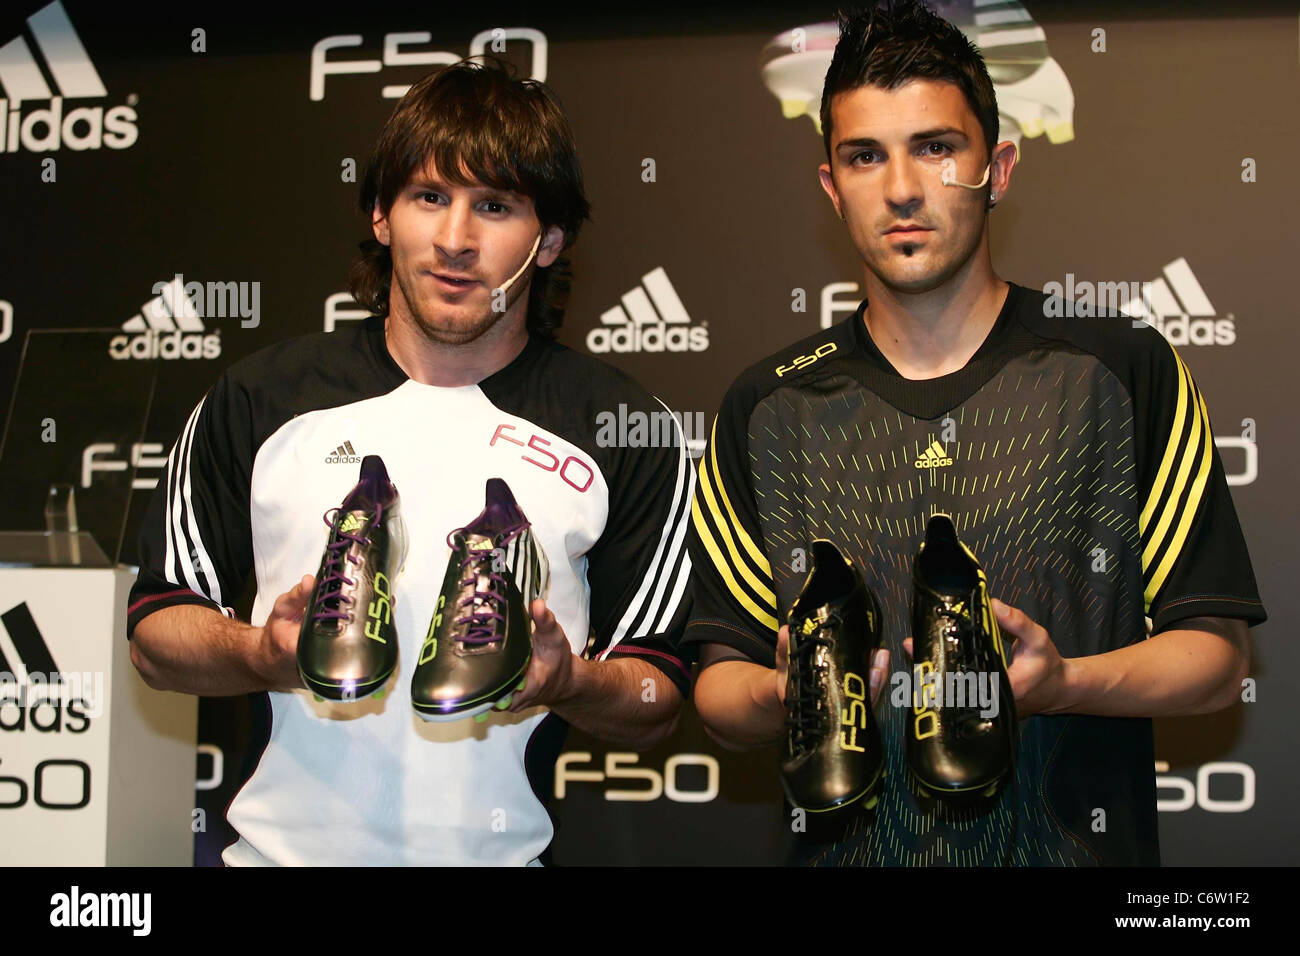 David Villa and Lionel Messi Press for launch of the Adidas F50 adZero football boot at the Circuit de Catalunya Stock Photo Alamy